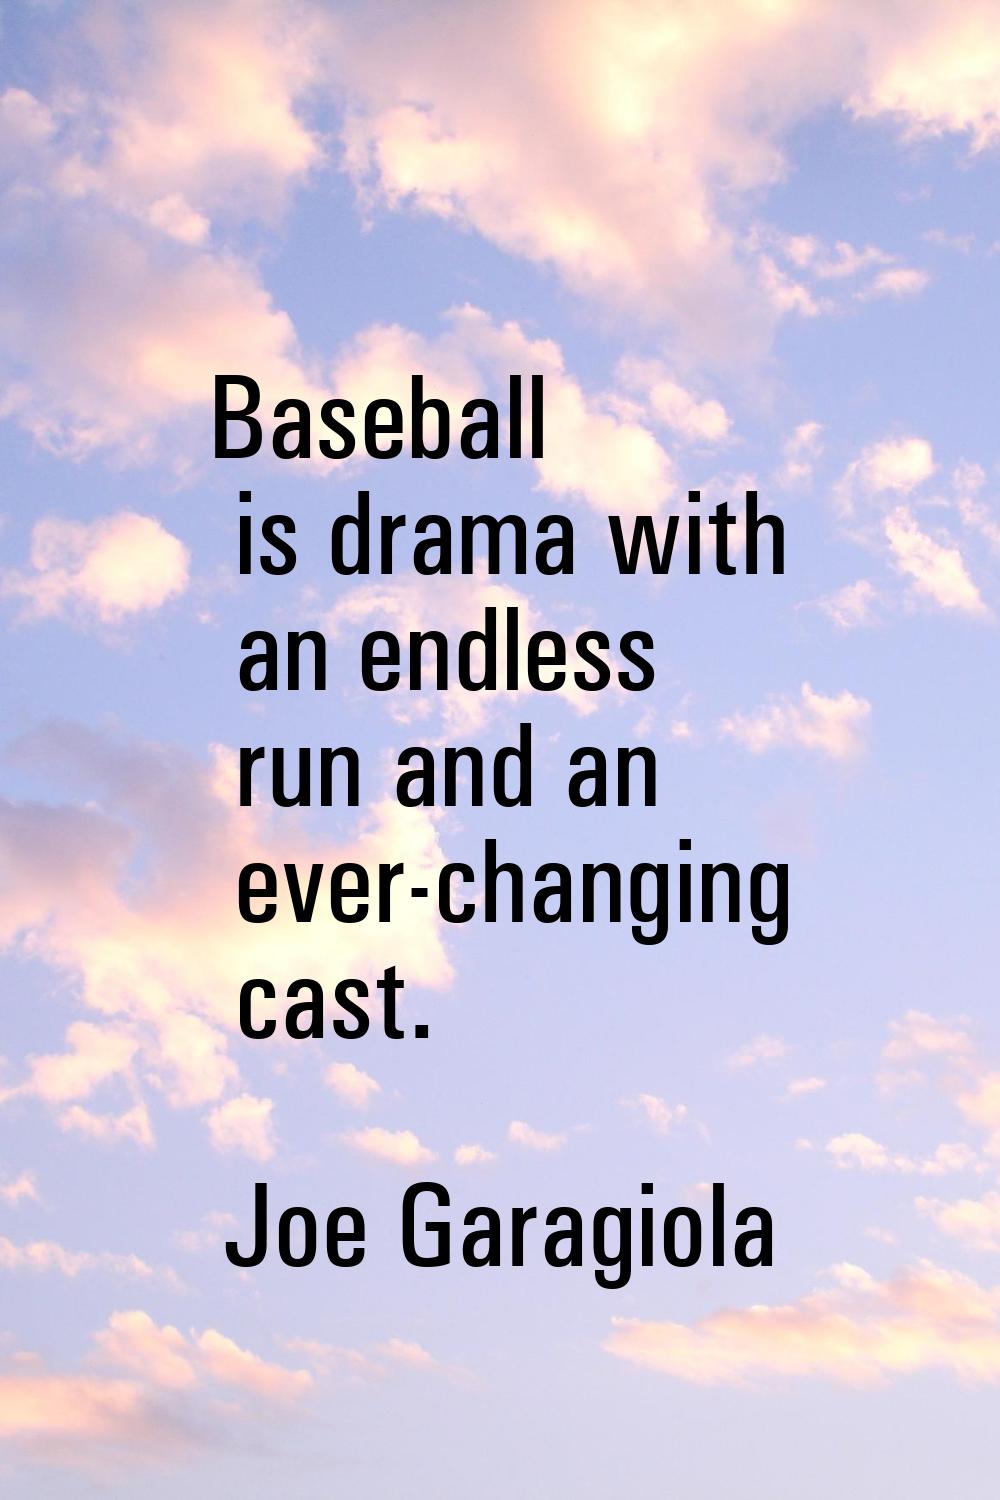 Baseball is drama with an endless run and an ever-changing cast.